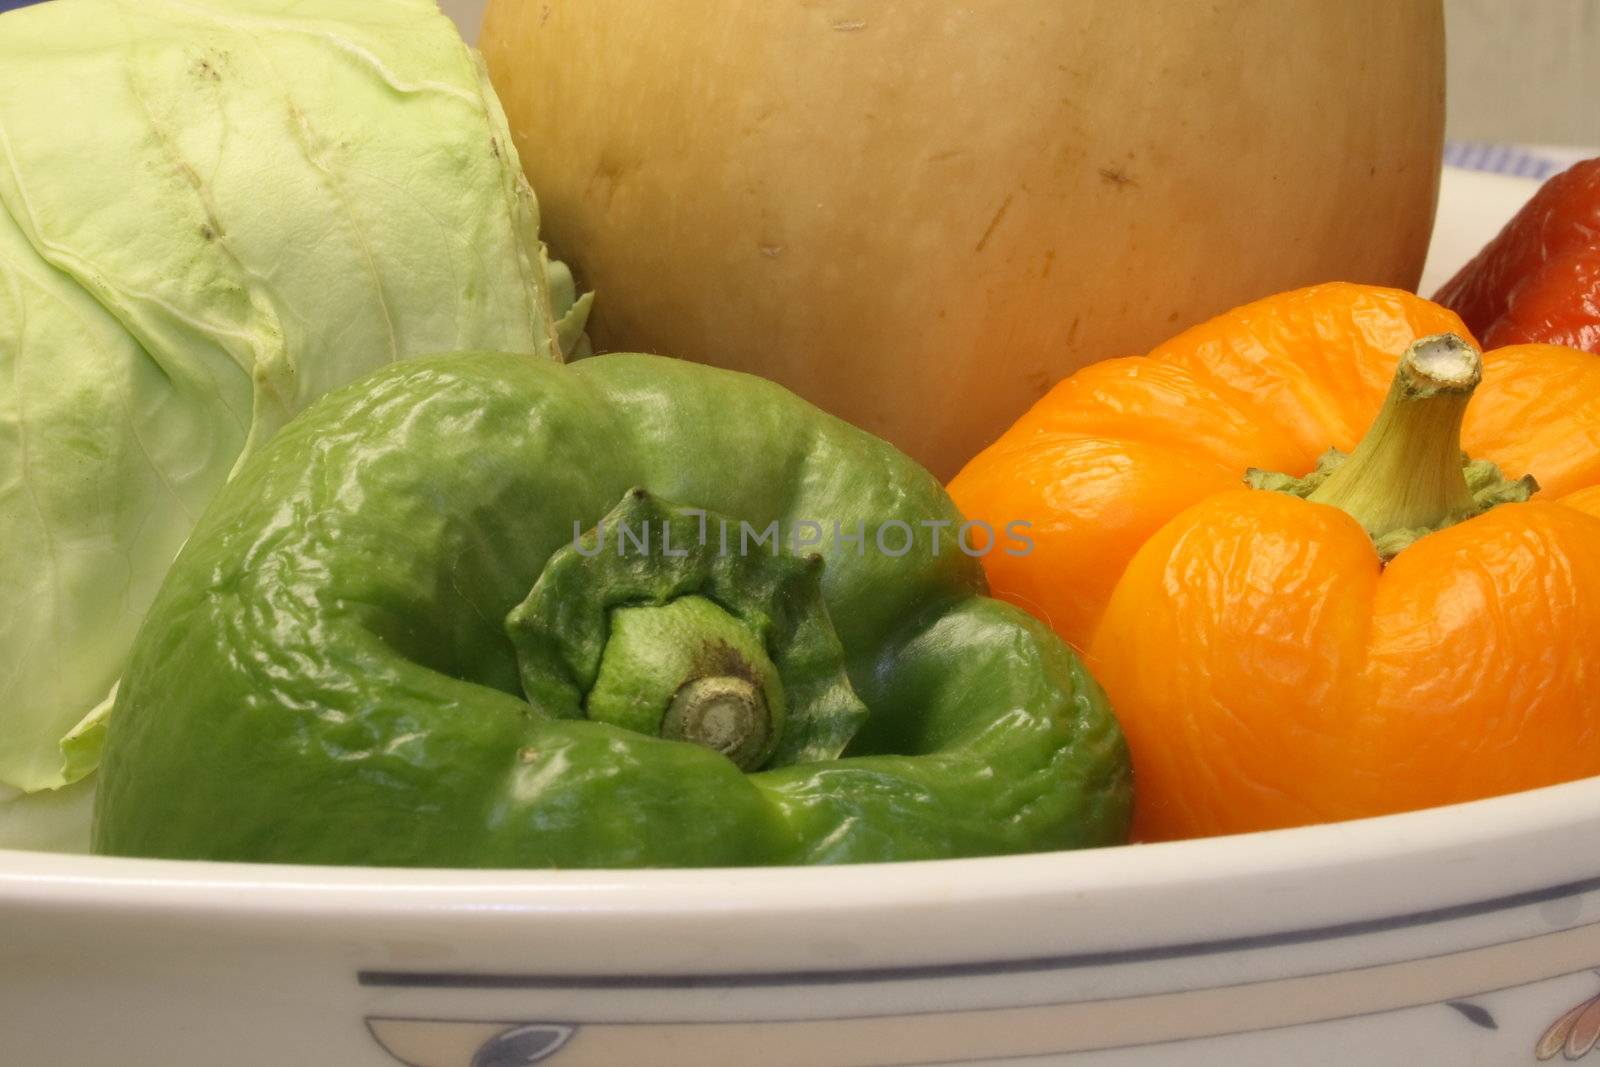 old peppers and cabbage with butternut squash in a dish showing how they dry up with age